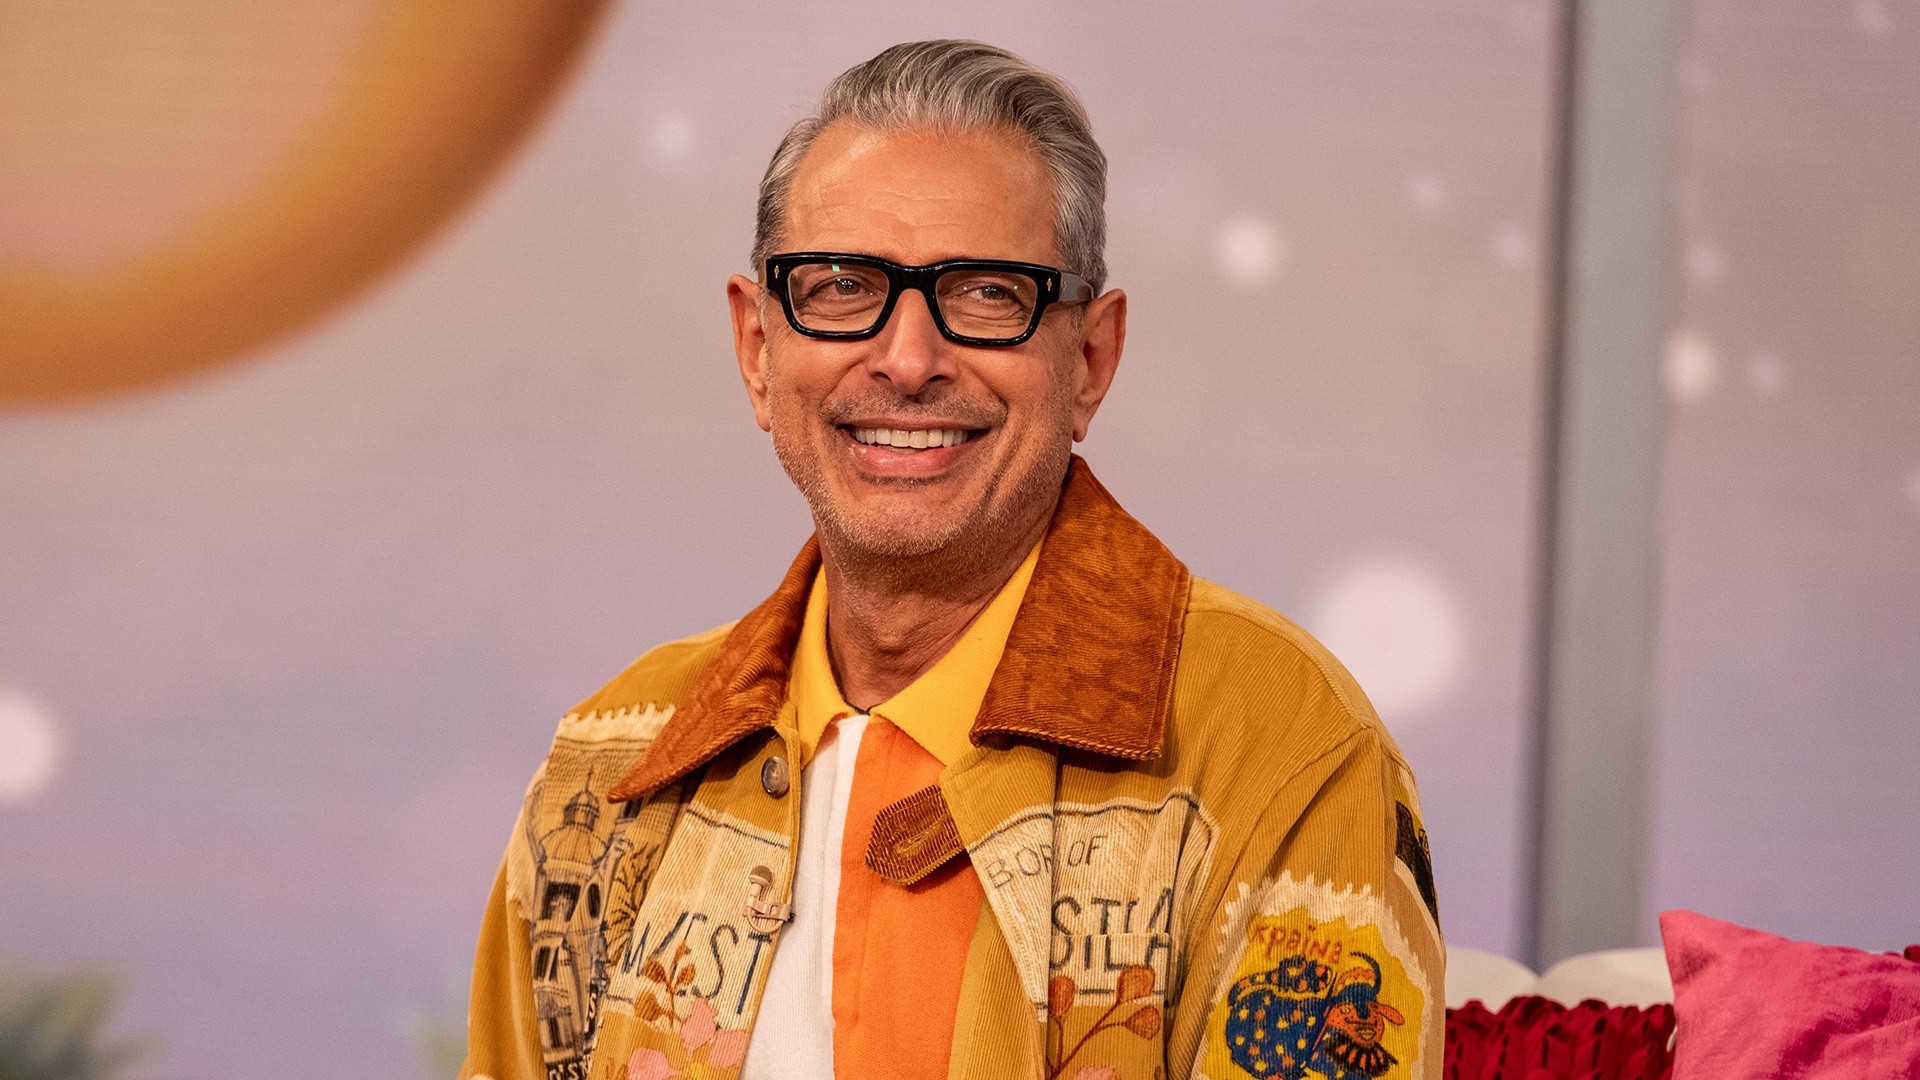 Jeff Goldblum talks being a father later in life